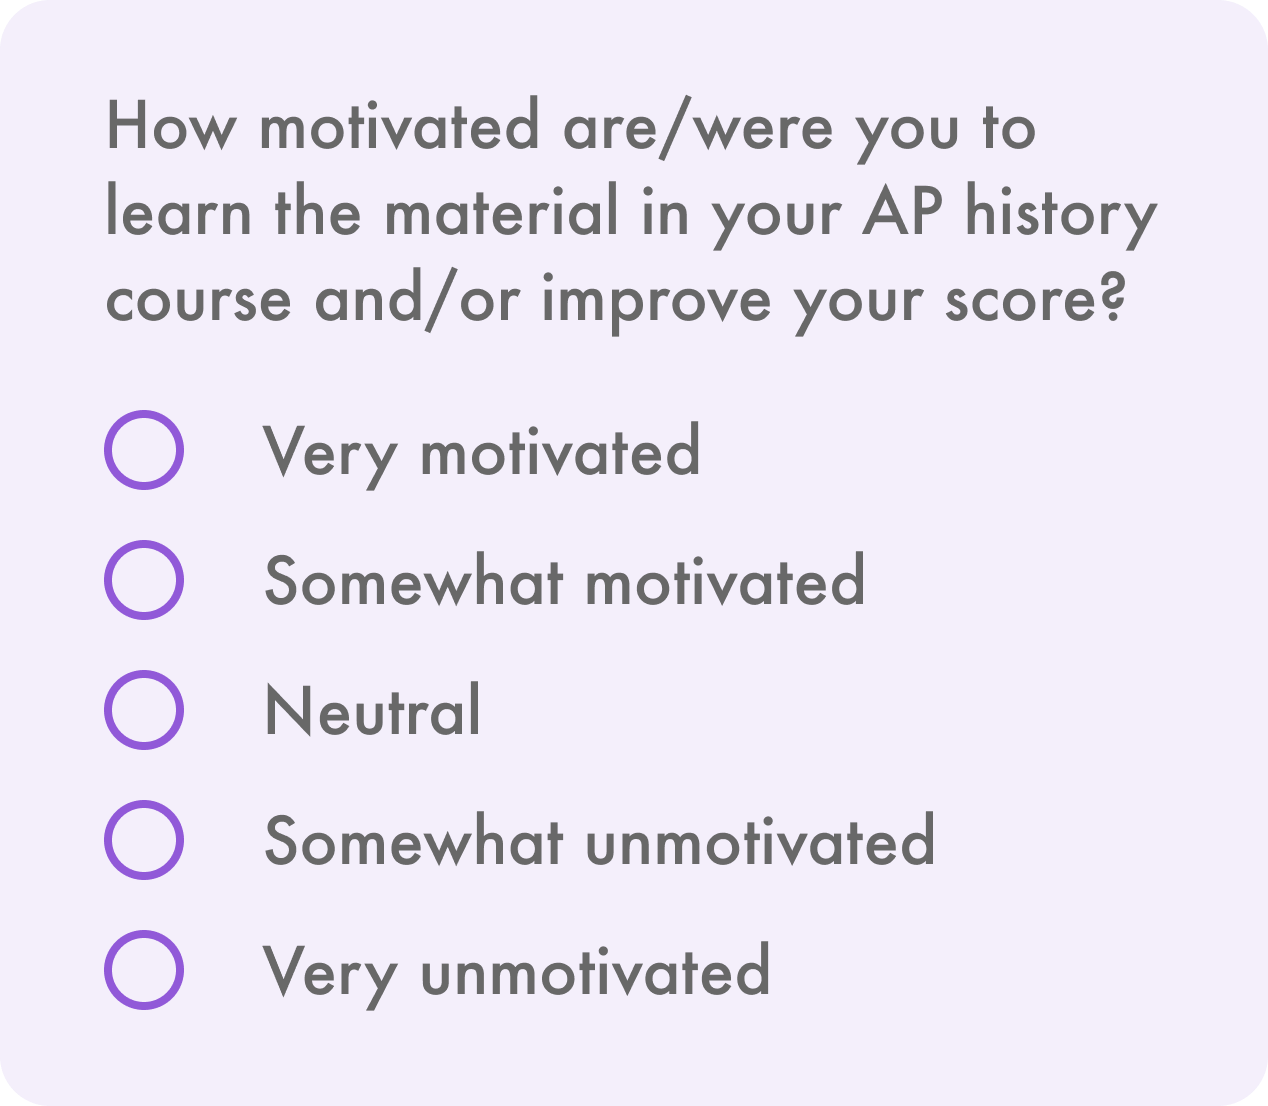 Screening question: 'How motivated are/were you to learn the material in your AP course and/or improve your score?' with answer choices from 'very motivated' to 'very unmotivated'